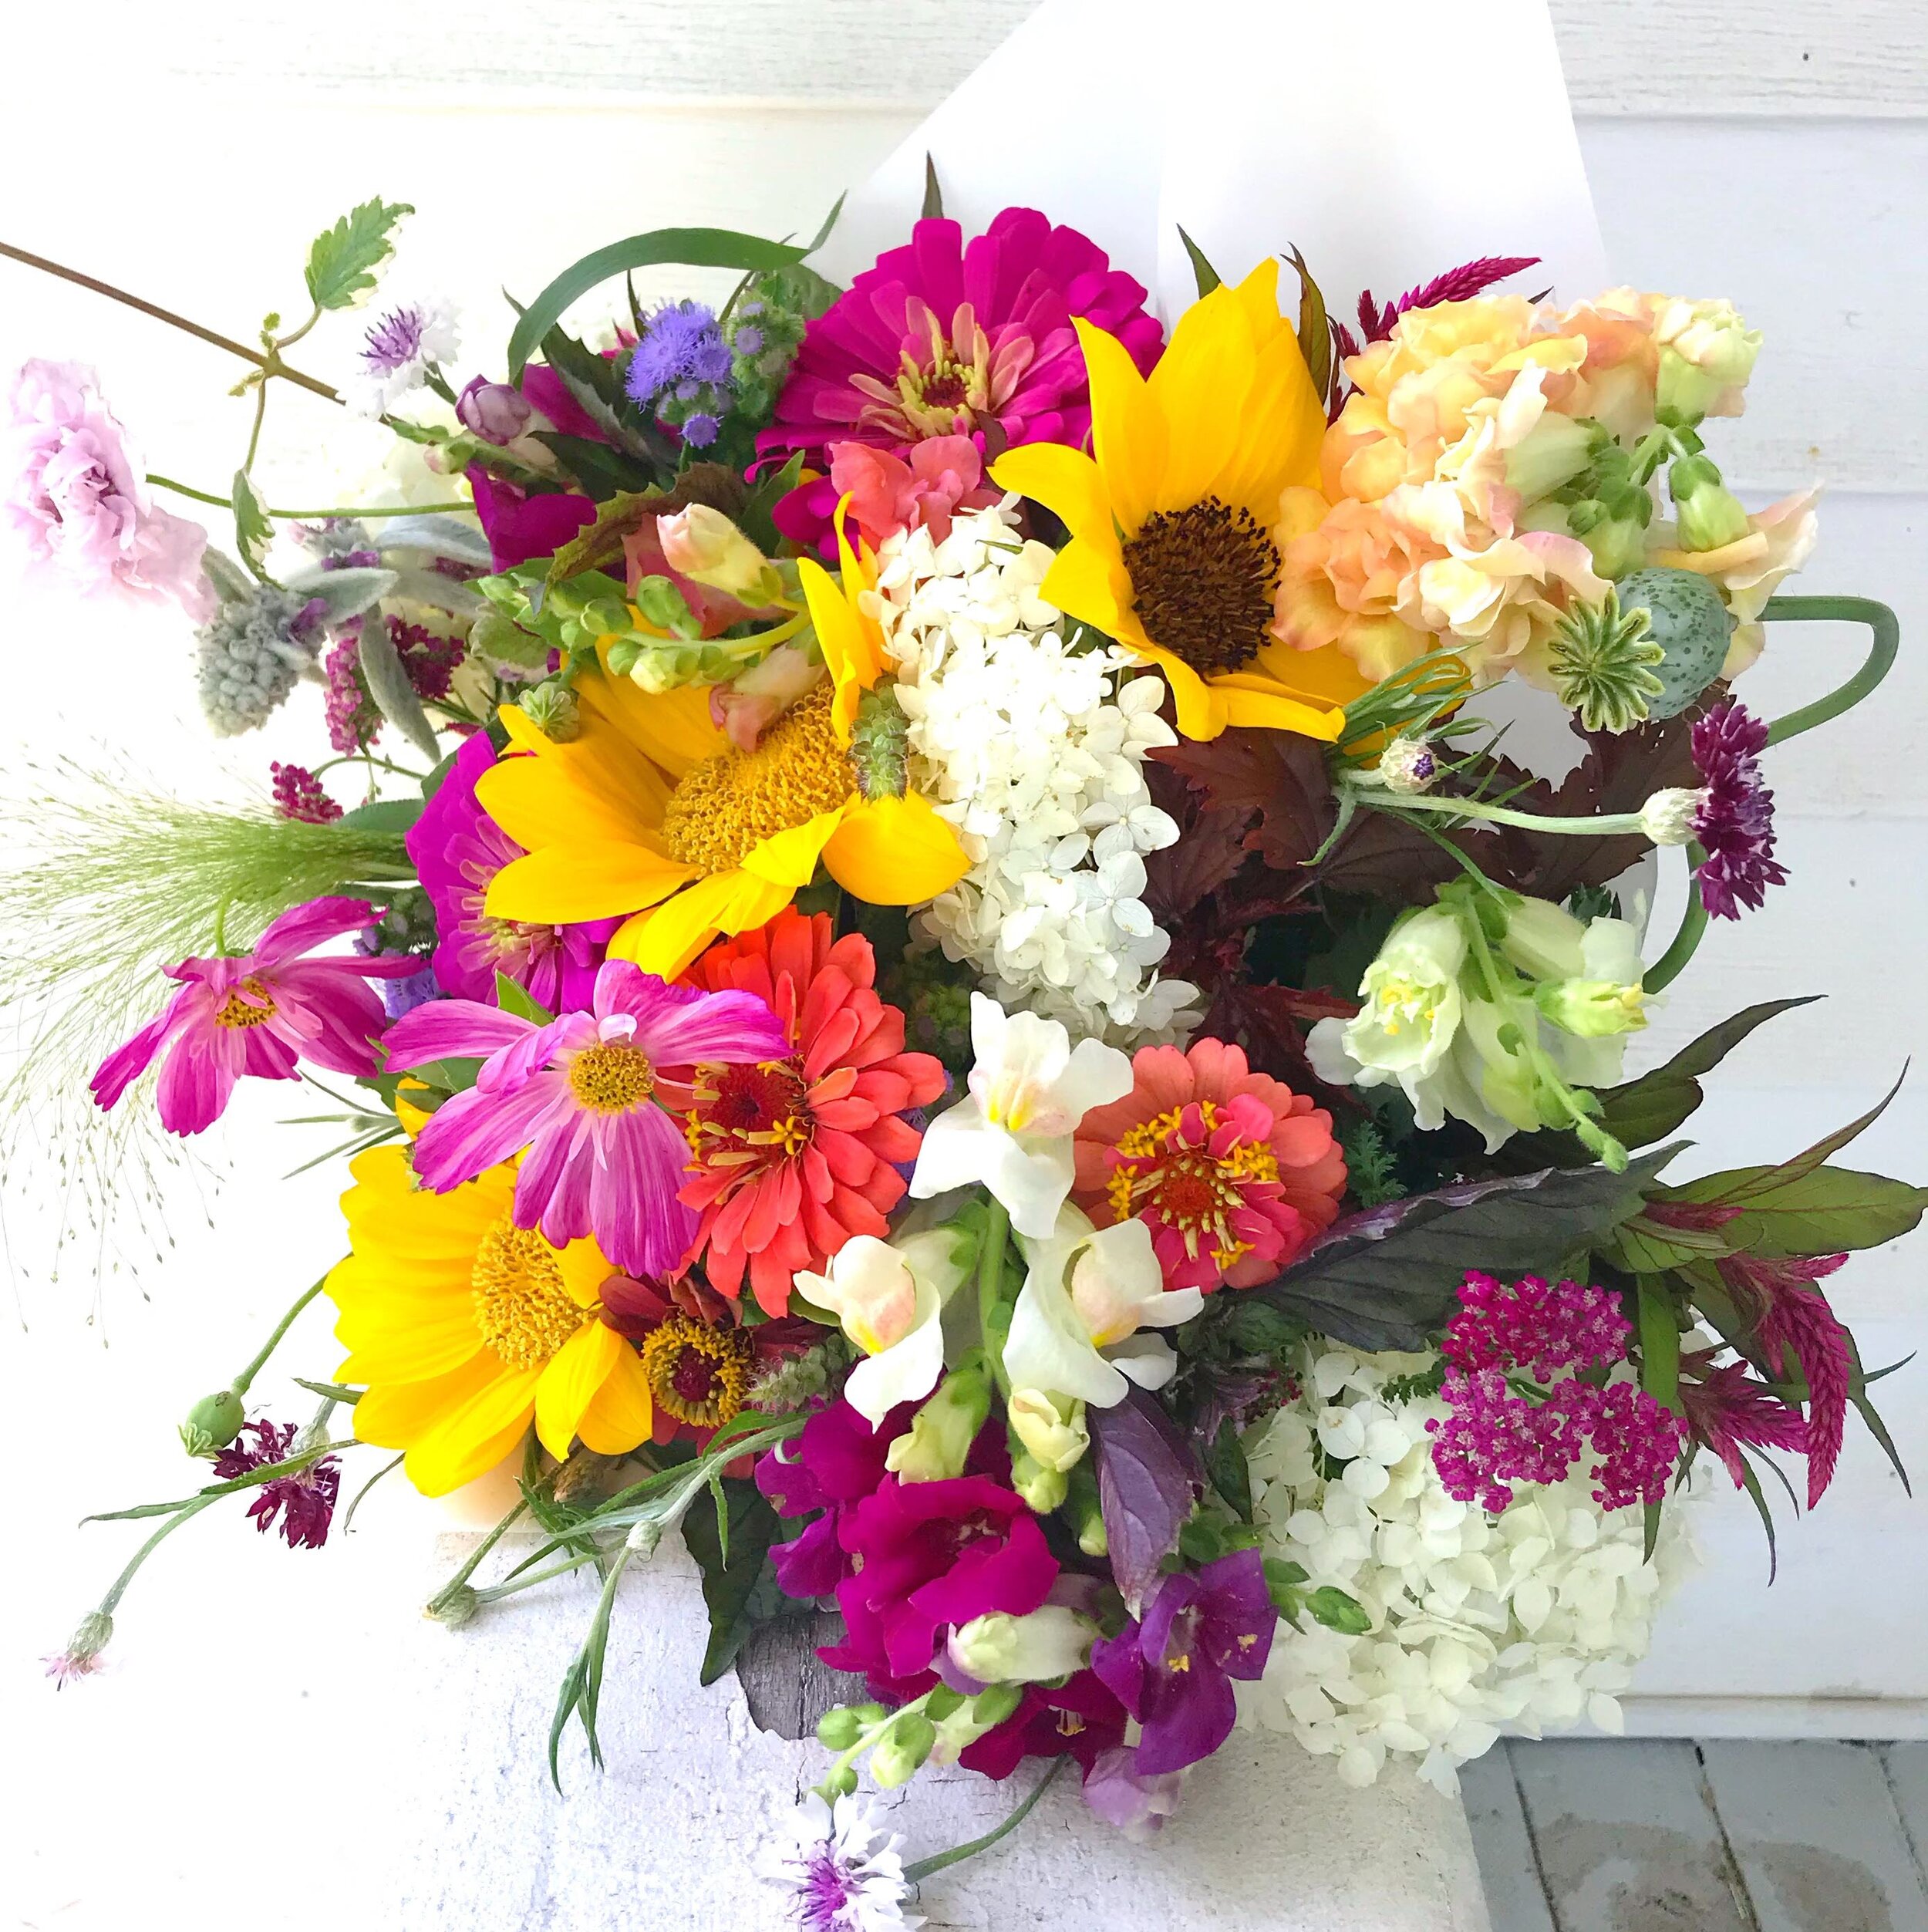 Find Our Flowers Bel Fiore Farm Floral